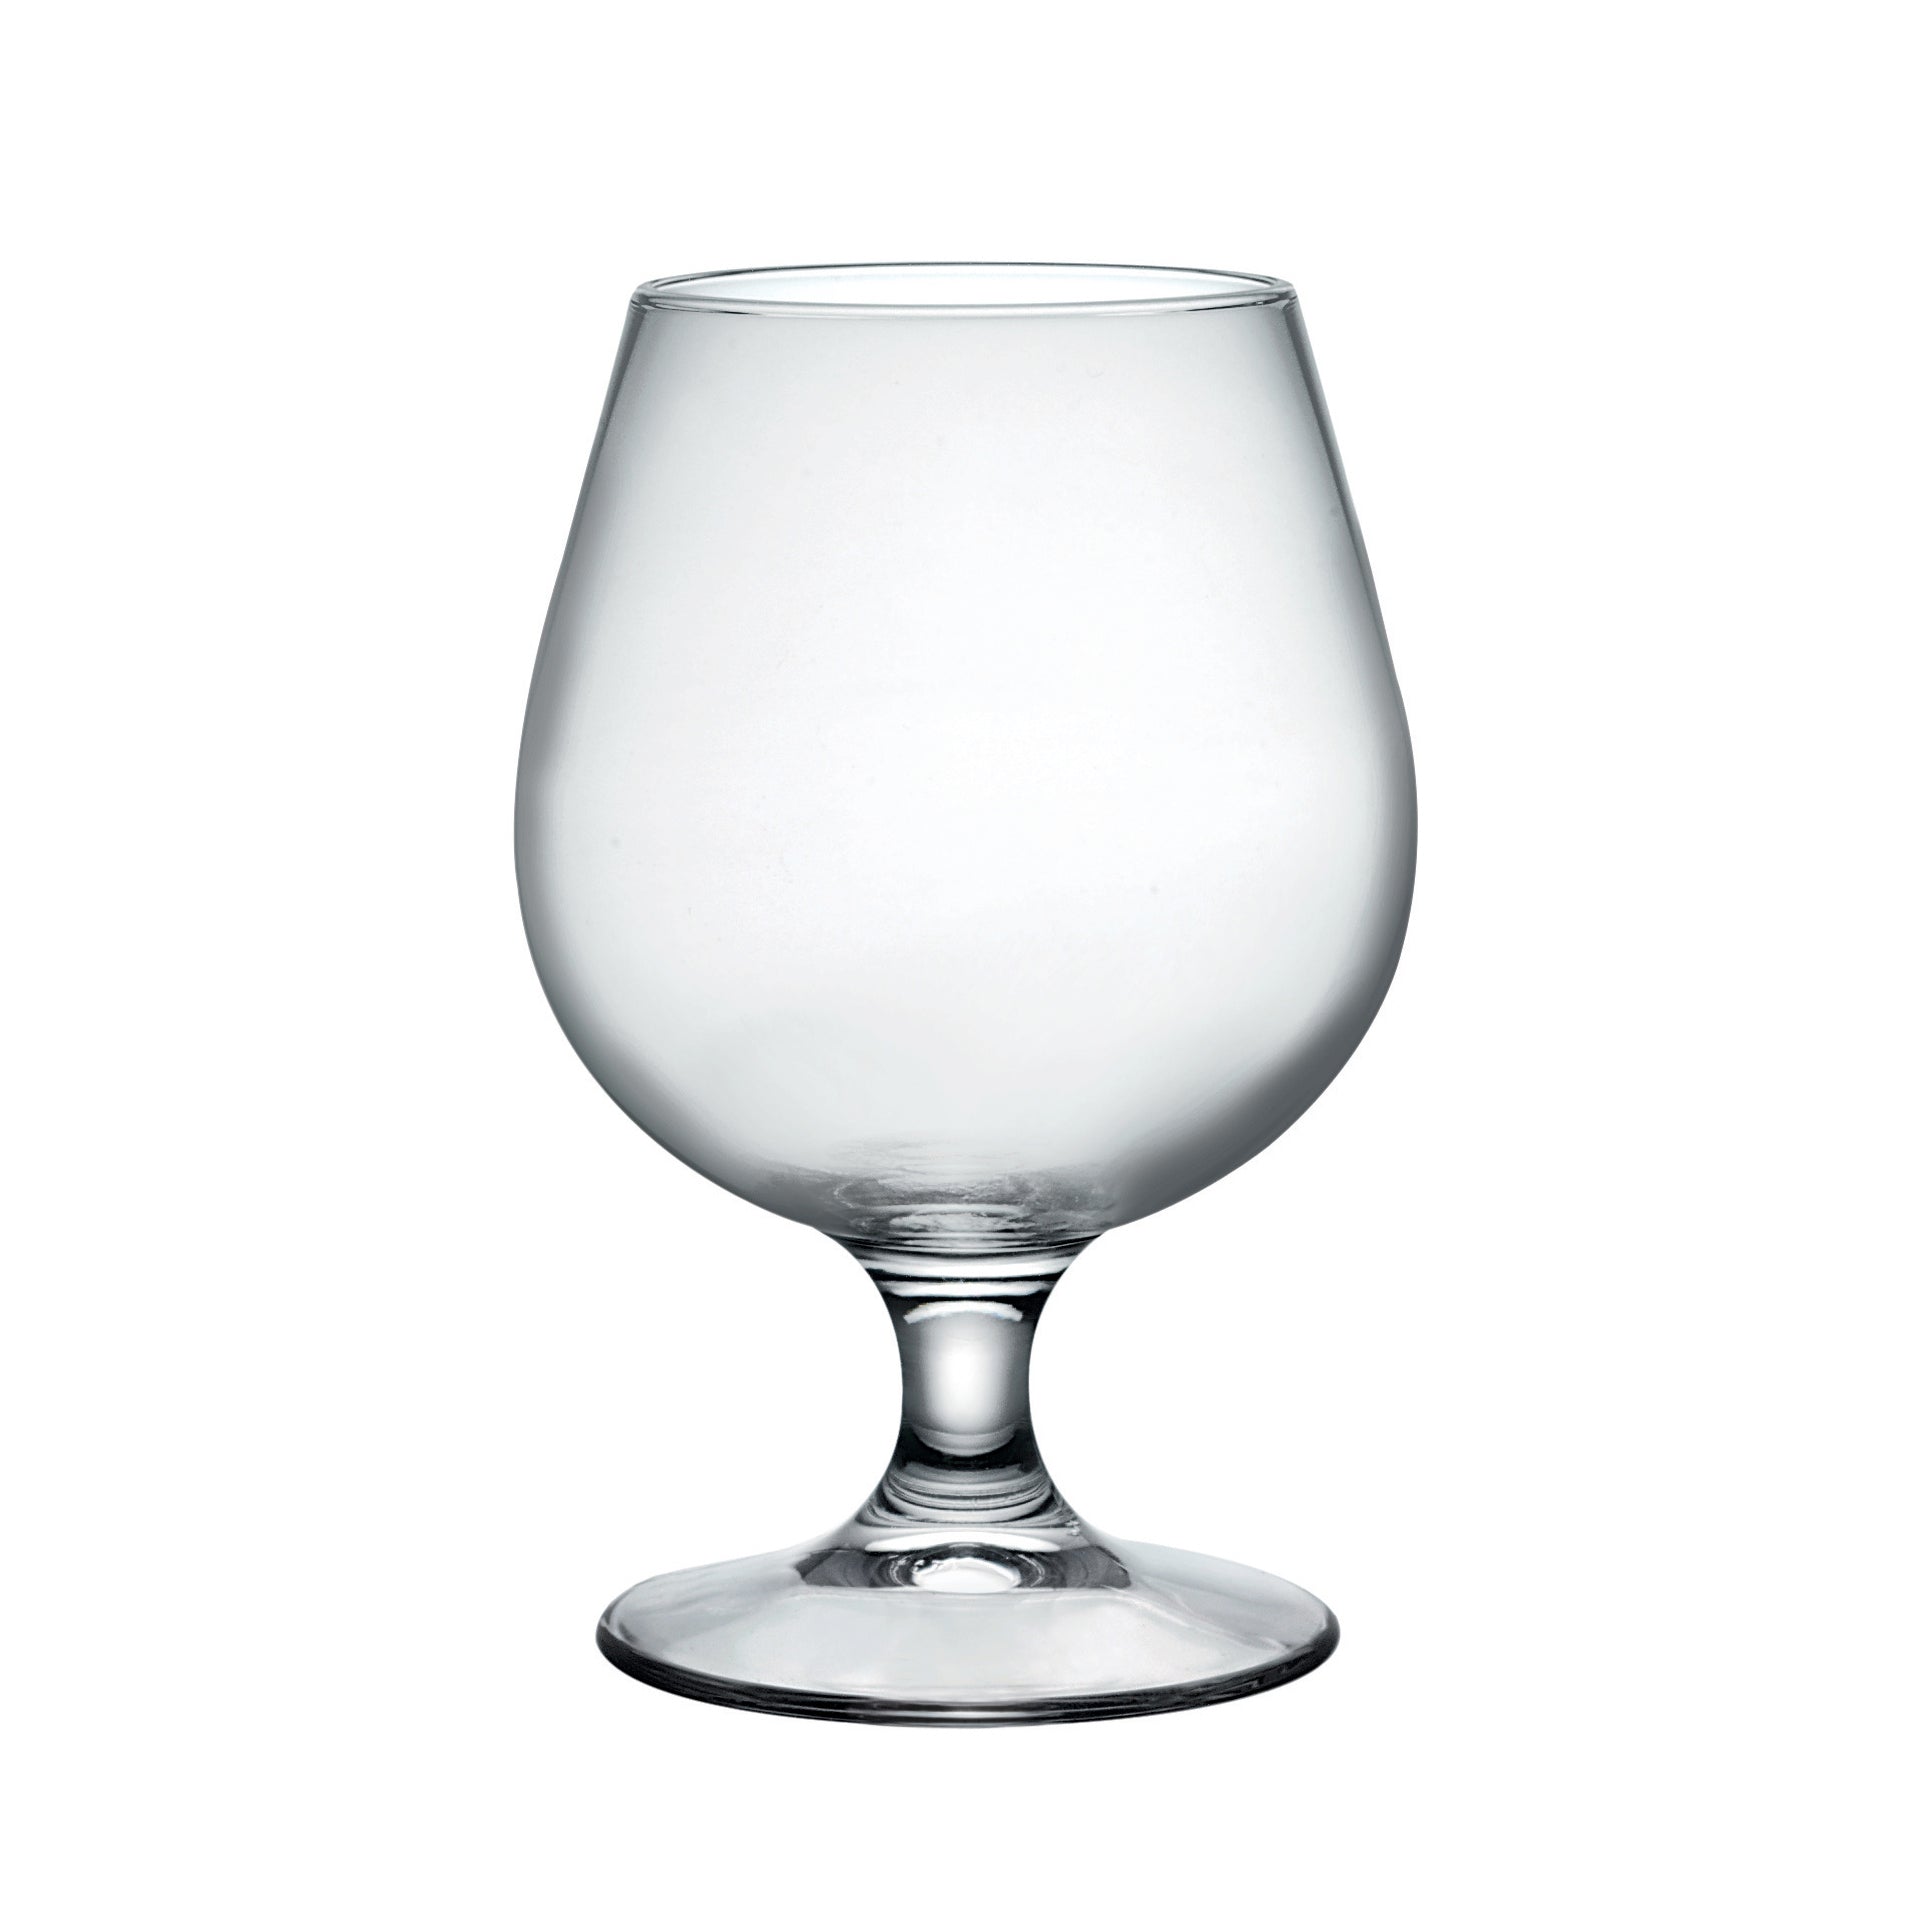 Crystal Cognac and Brandy Glasses, Set of 6 0429